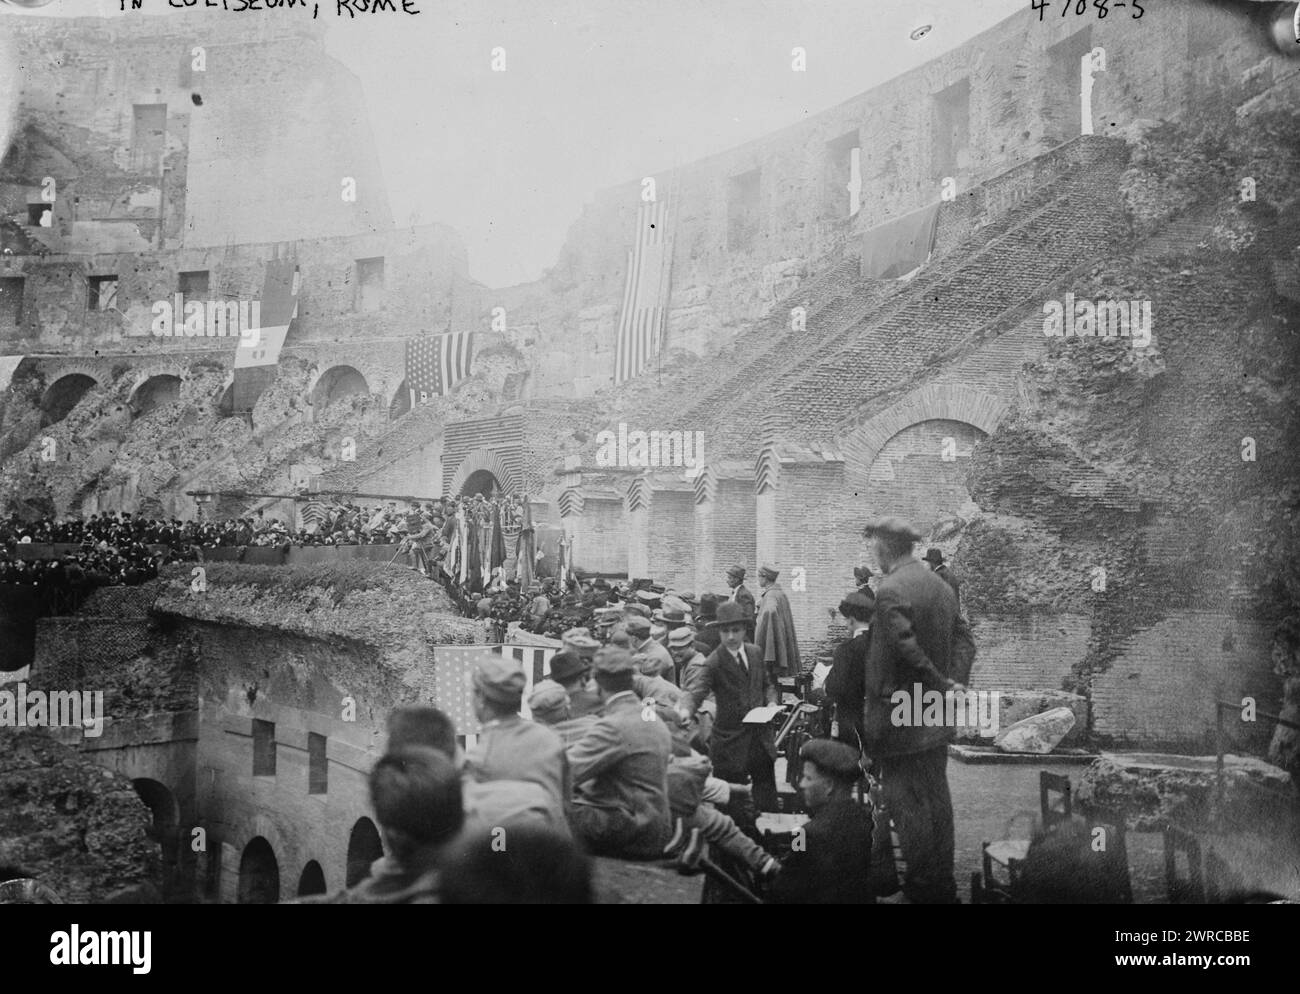 In Coliseum, Rome, Photograph shows flags and people in the Colosseum (Coliseum), Rome, Italy during the visit of President Woodrow Wilson on January 4, 1919., between ca. 1915 and 1919, Rome, Glass negatives, 1 negative: glass Stock Photo